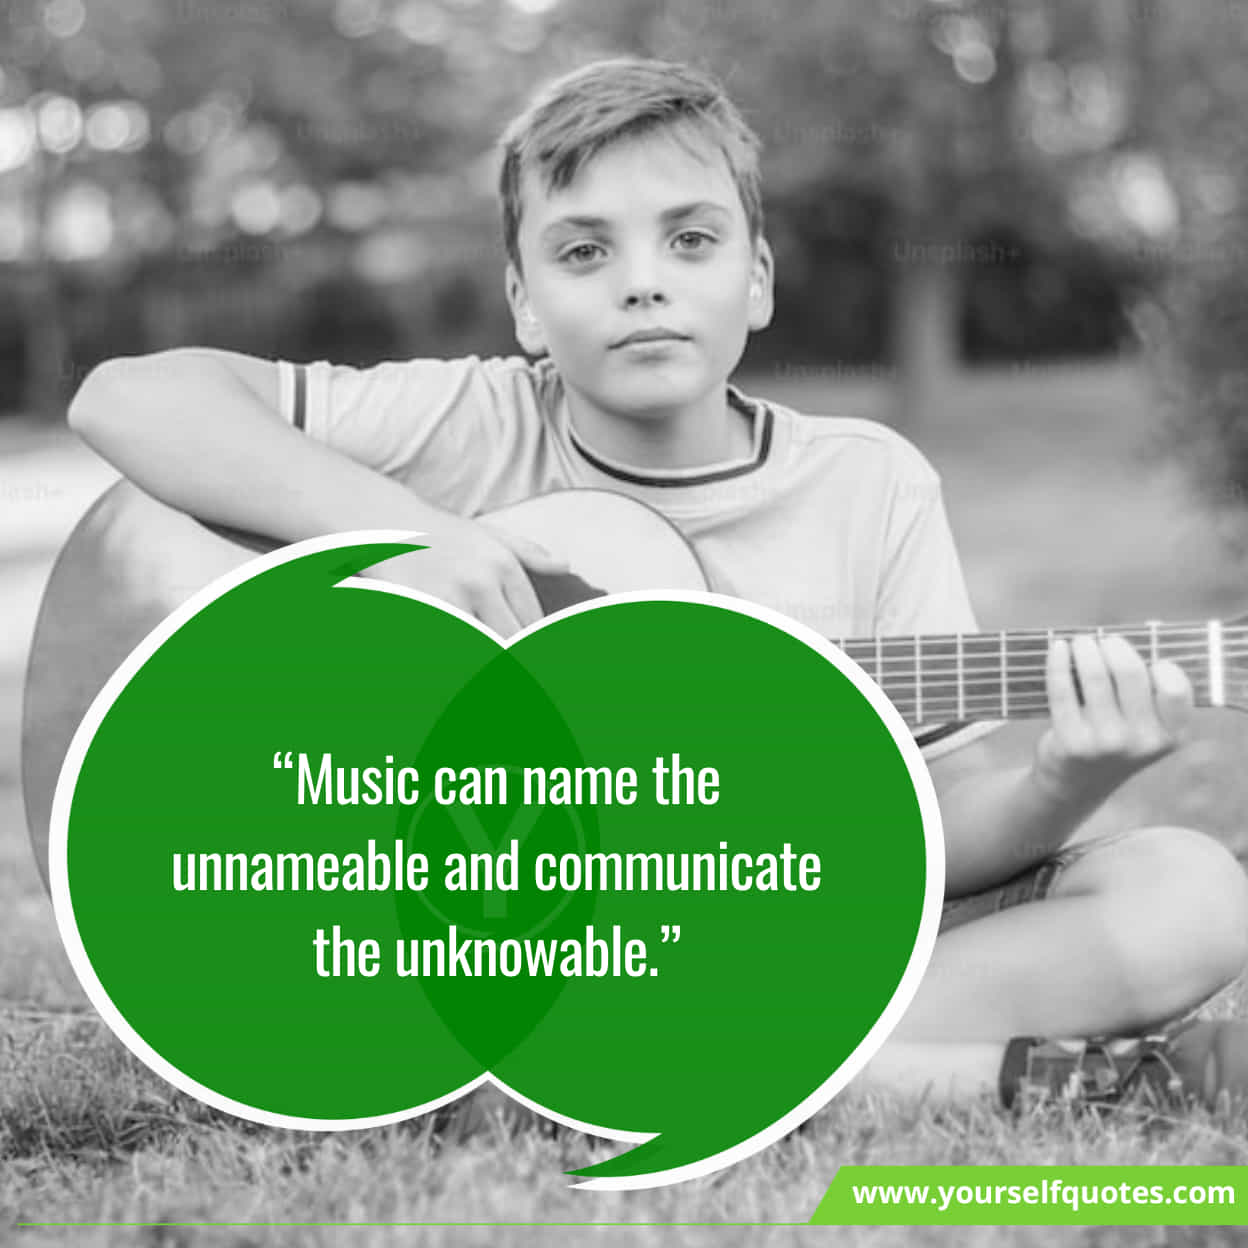 Inspirational World Music Day quotes